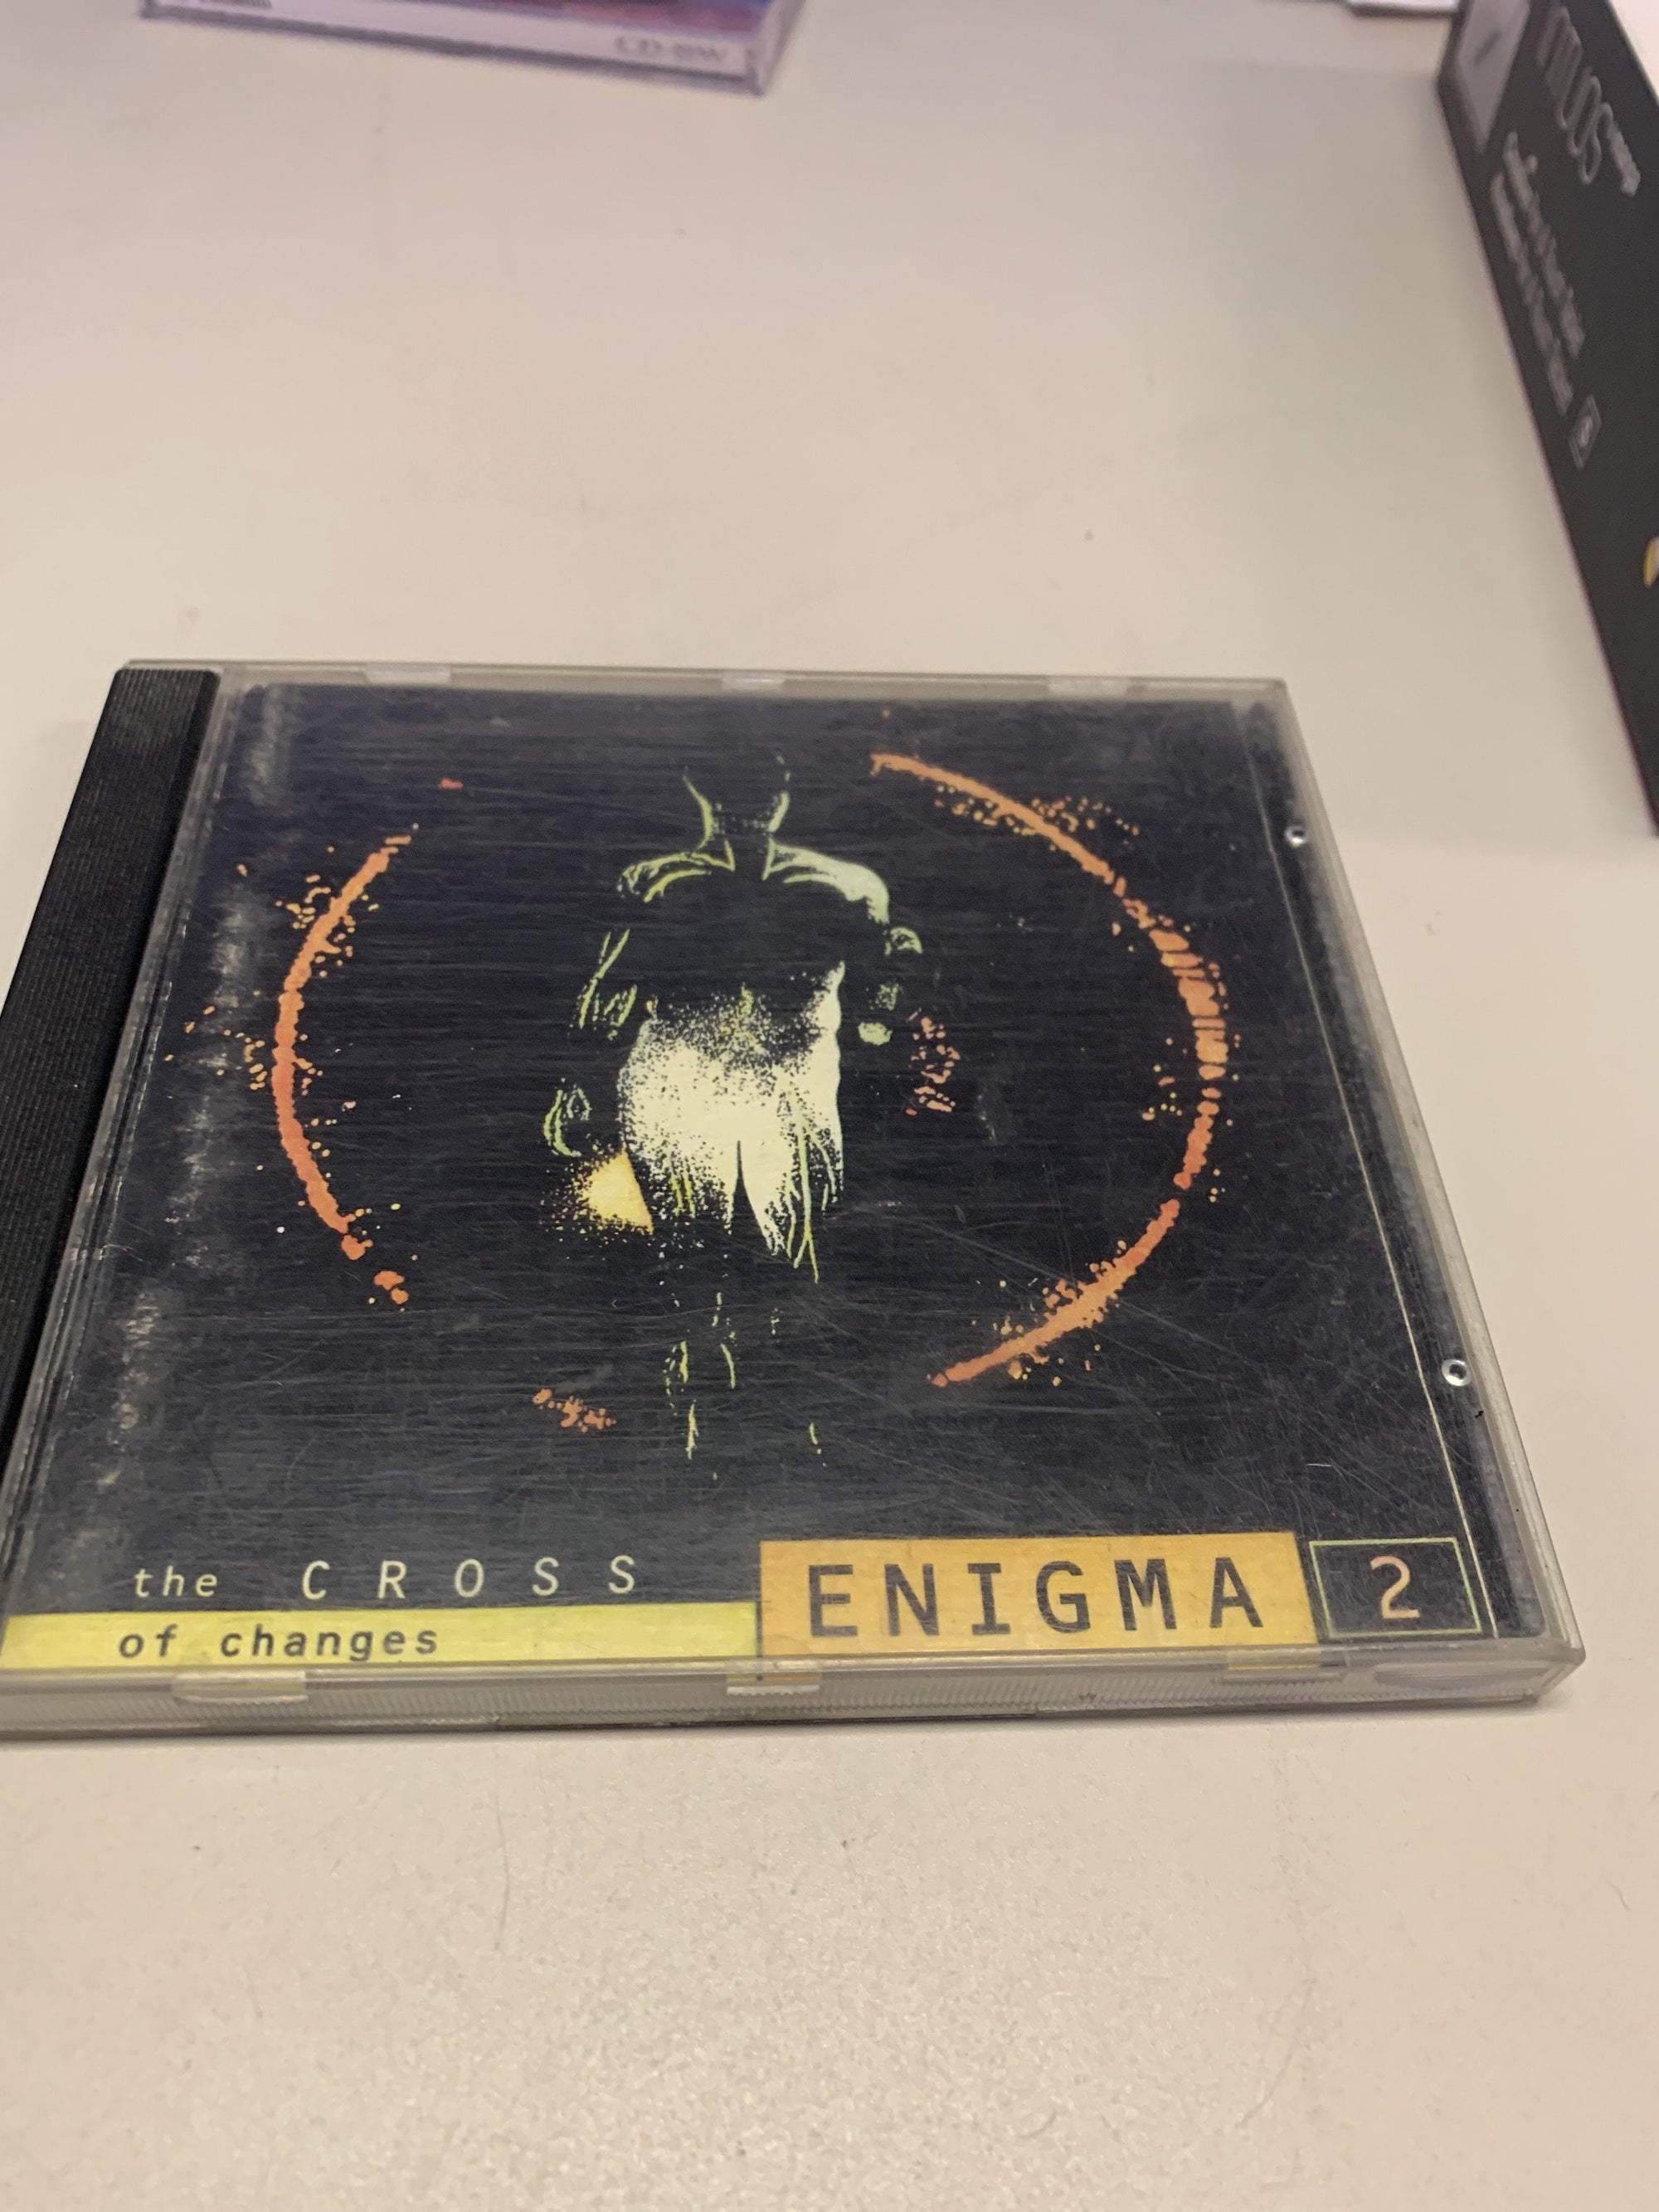 Enigma: The Cross of Changes (CD) - 2ndhandwarehouse.com